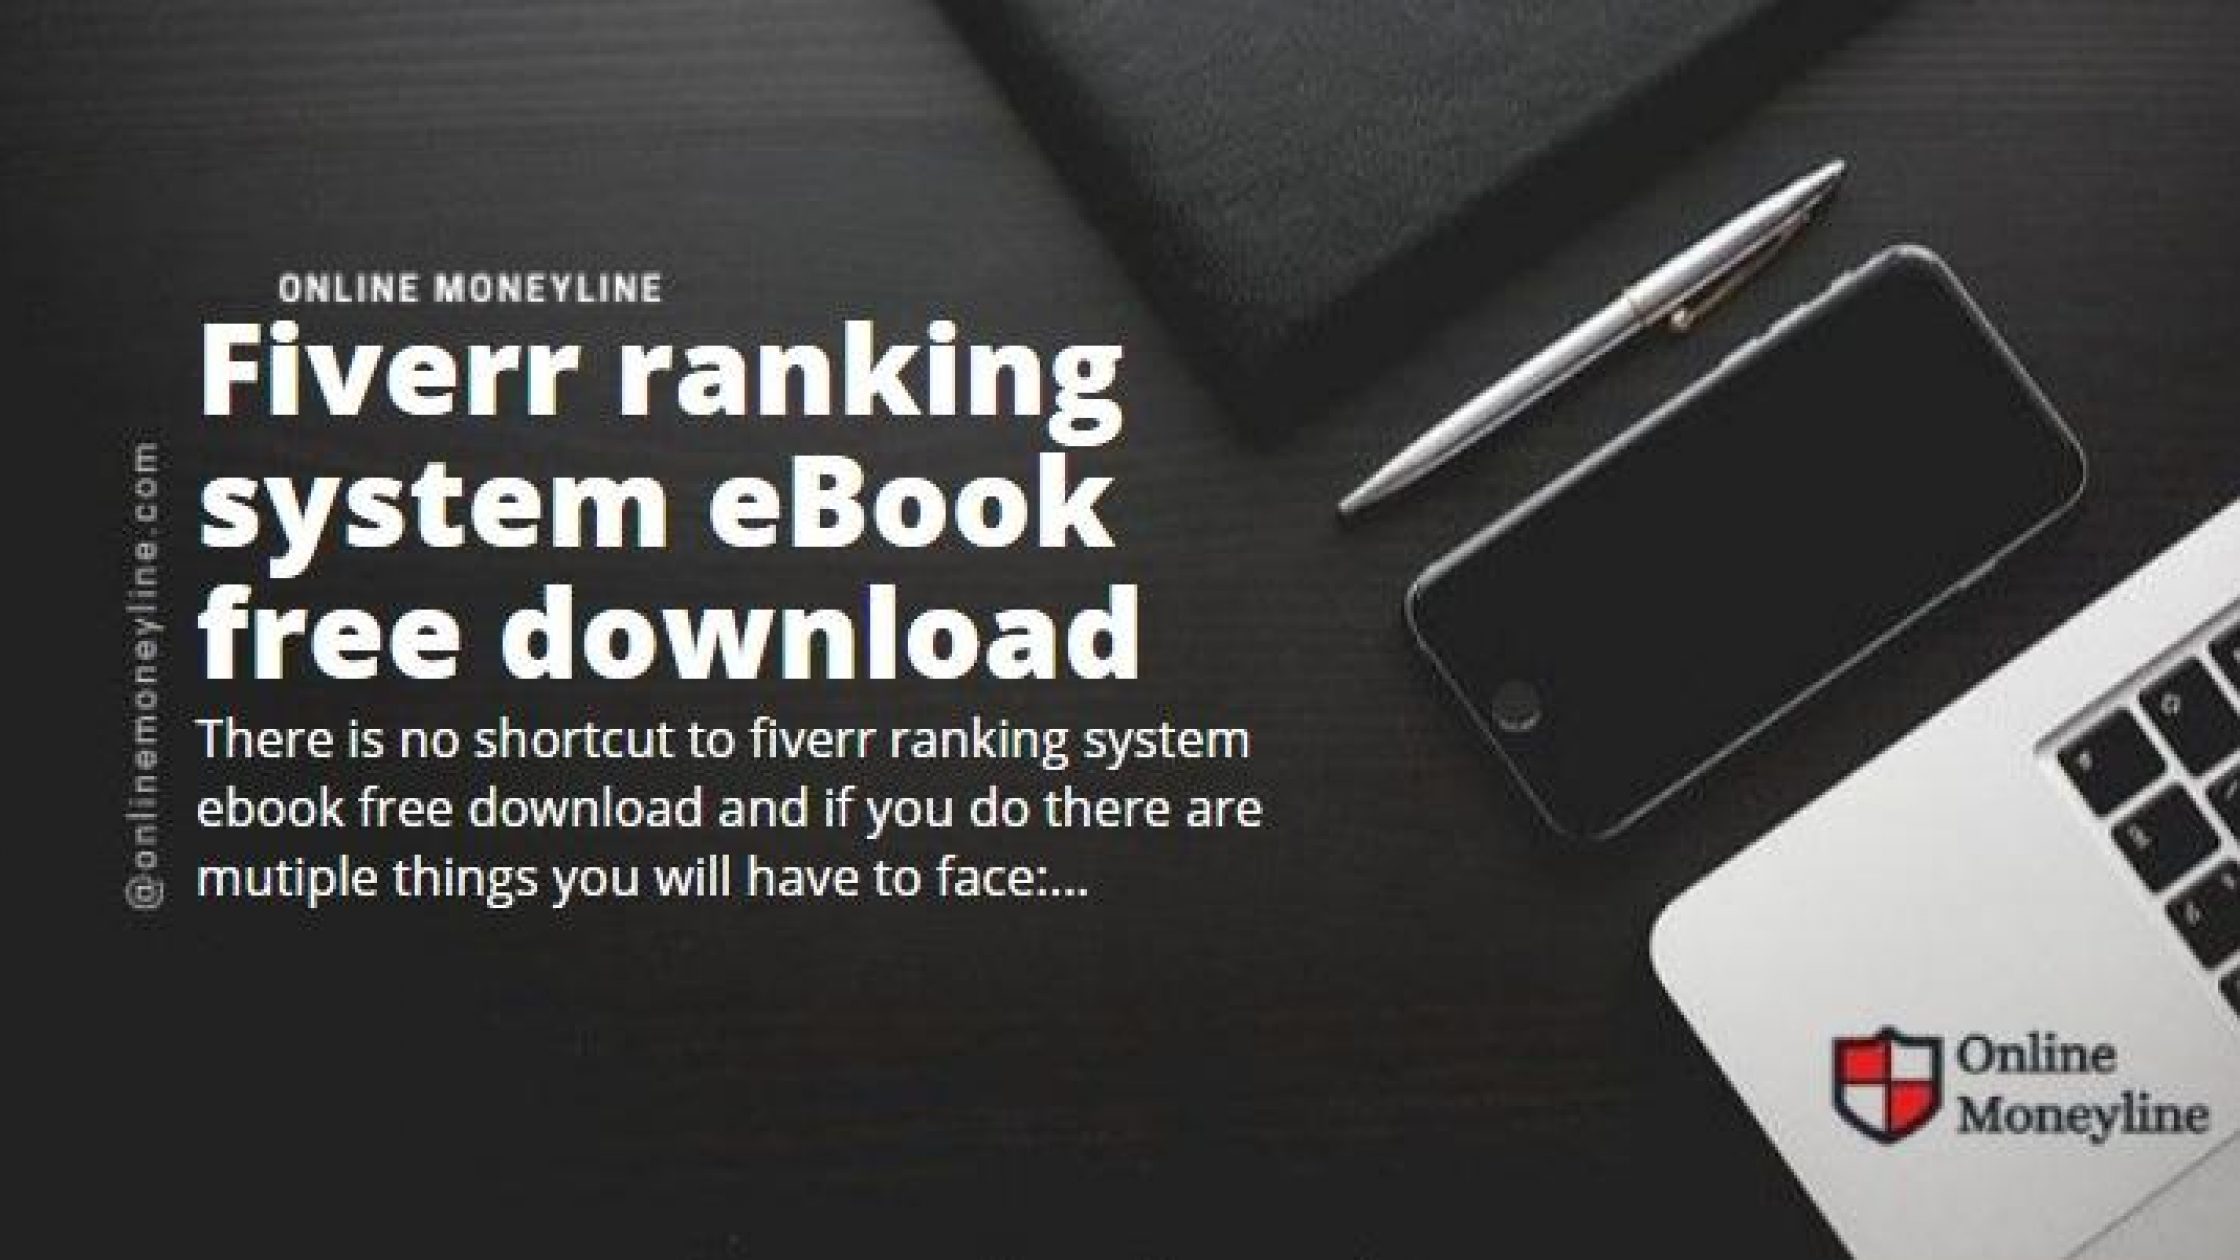 Fiverr ranking system eBook free download